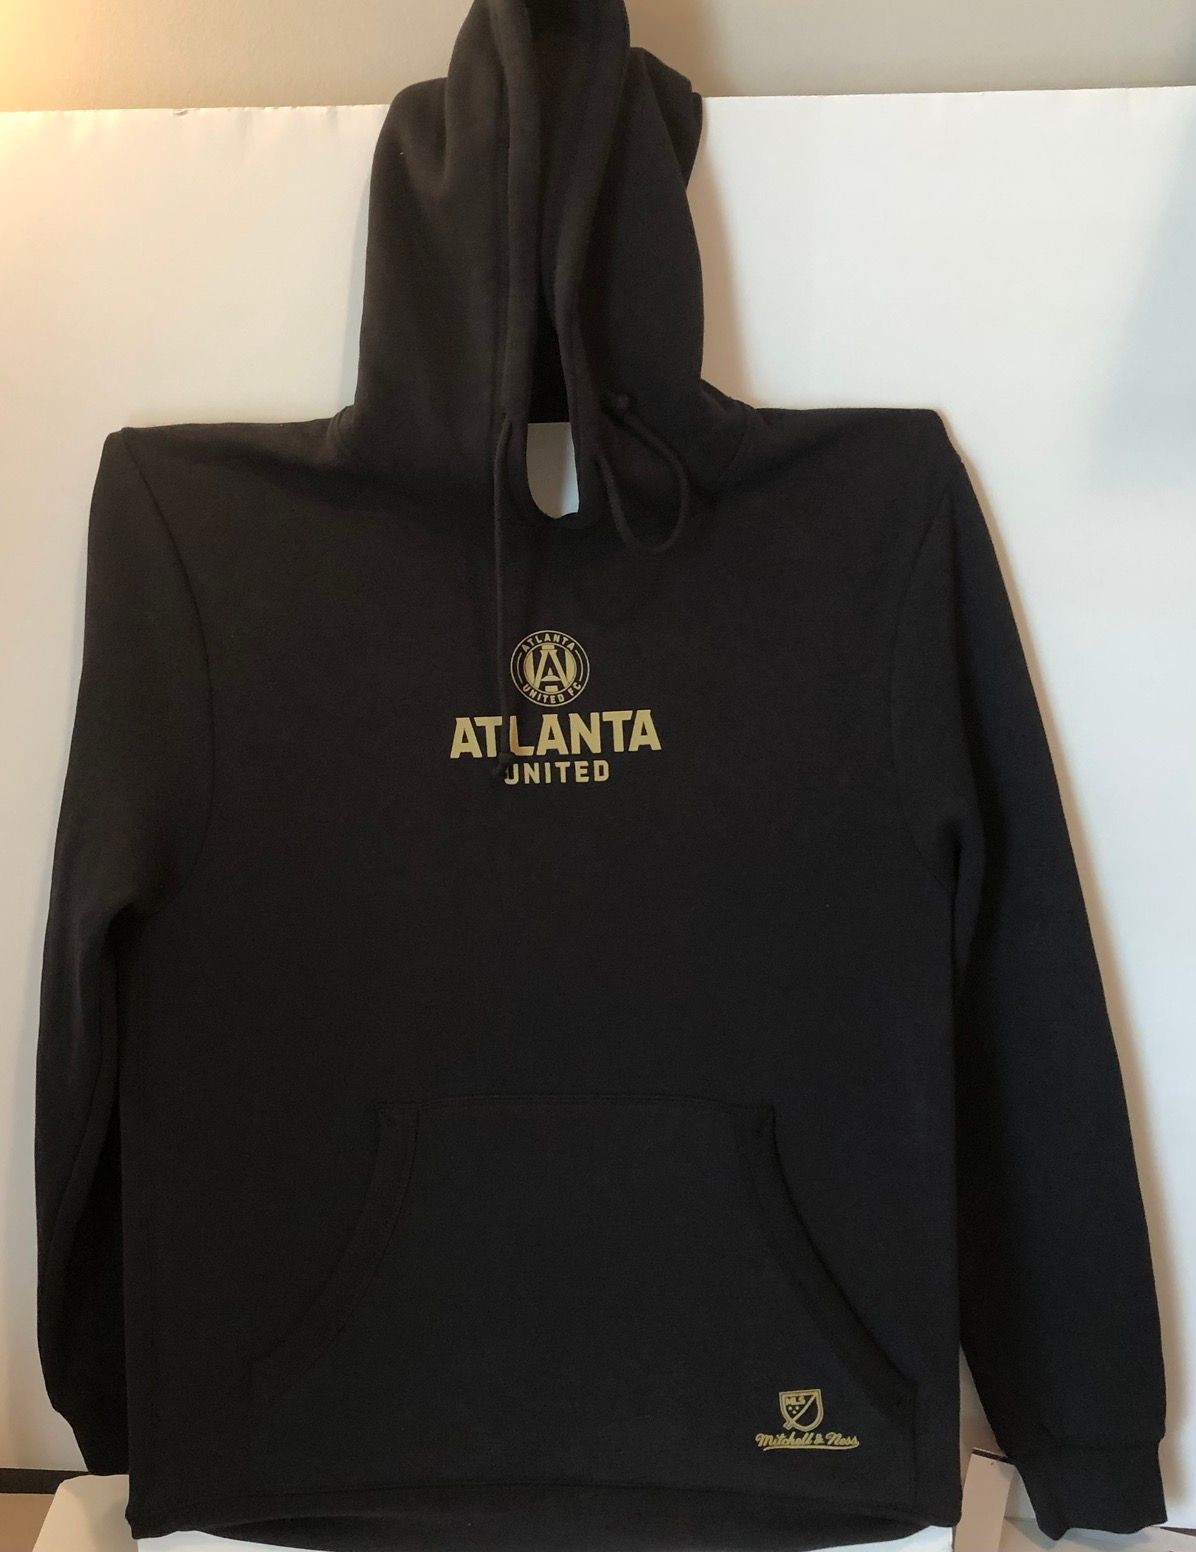 Mitchell & Ness Atlanta United Soccer Hoodie Black Med Hoody Mitchell &Ness Size US M / EU 48-50 / 2 - 1 Preview